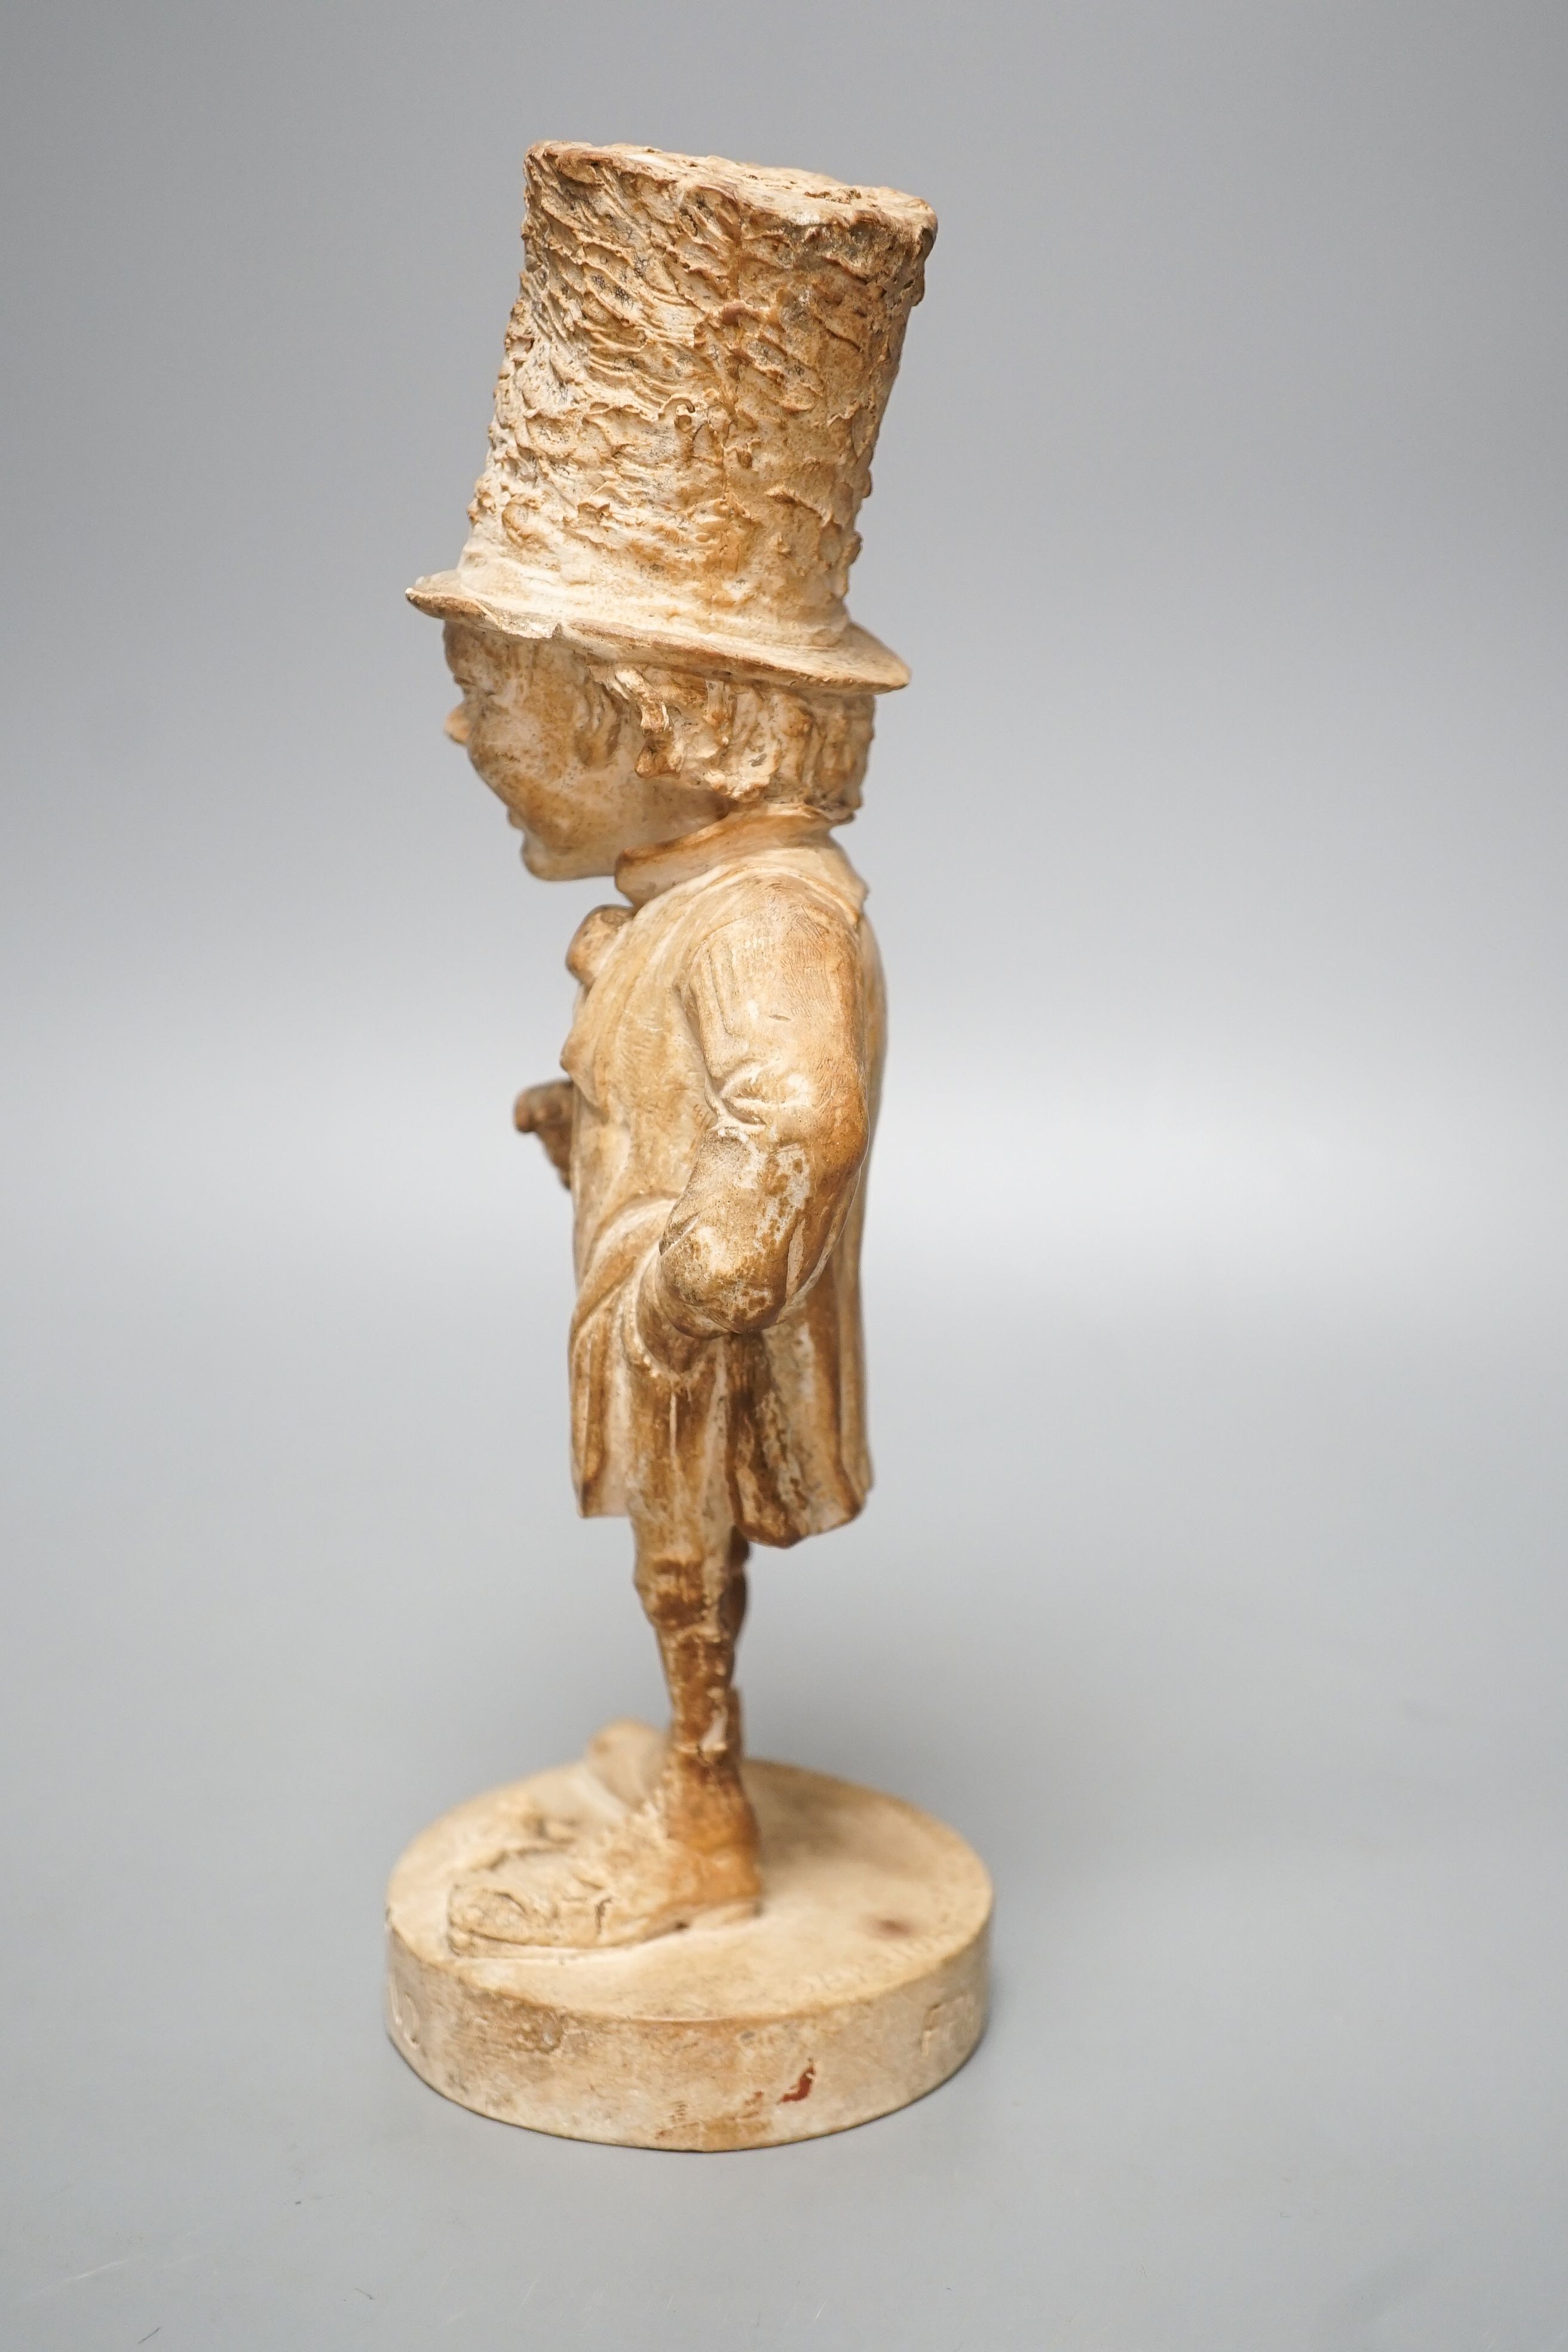 A plaster character figure, 'England, Feb 17 - 1880, Copyright of Ch, Cortopassi, Sc’ 27cm